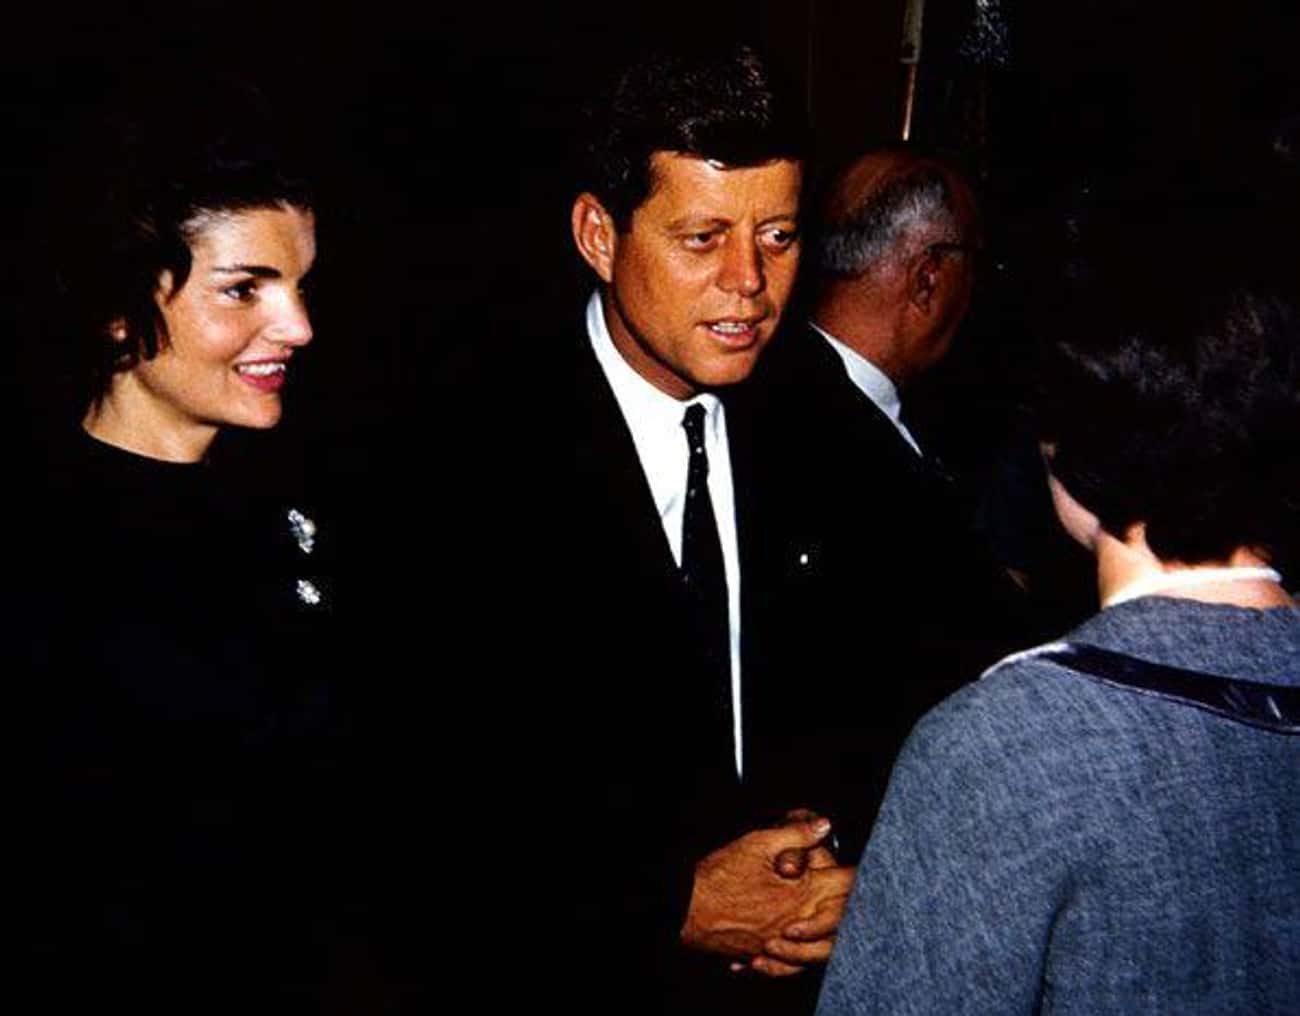 She Was Fluent In French, Spanish, And Italian, And She Used This To Help JFK&#39;s Political Career